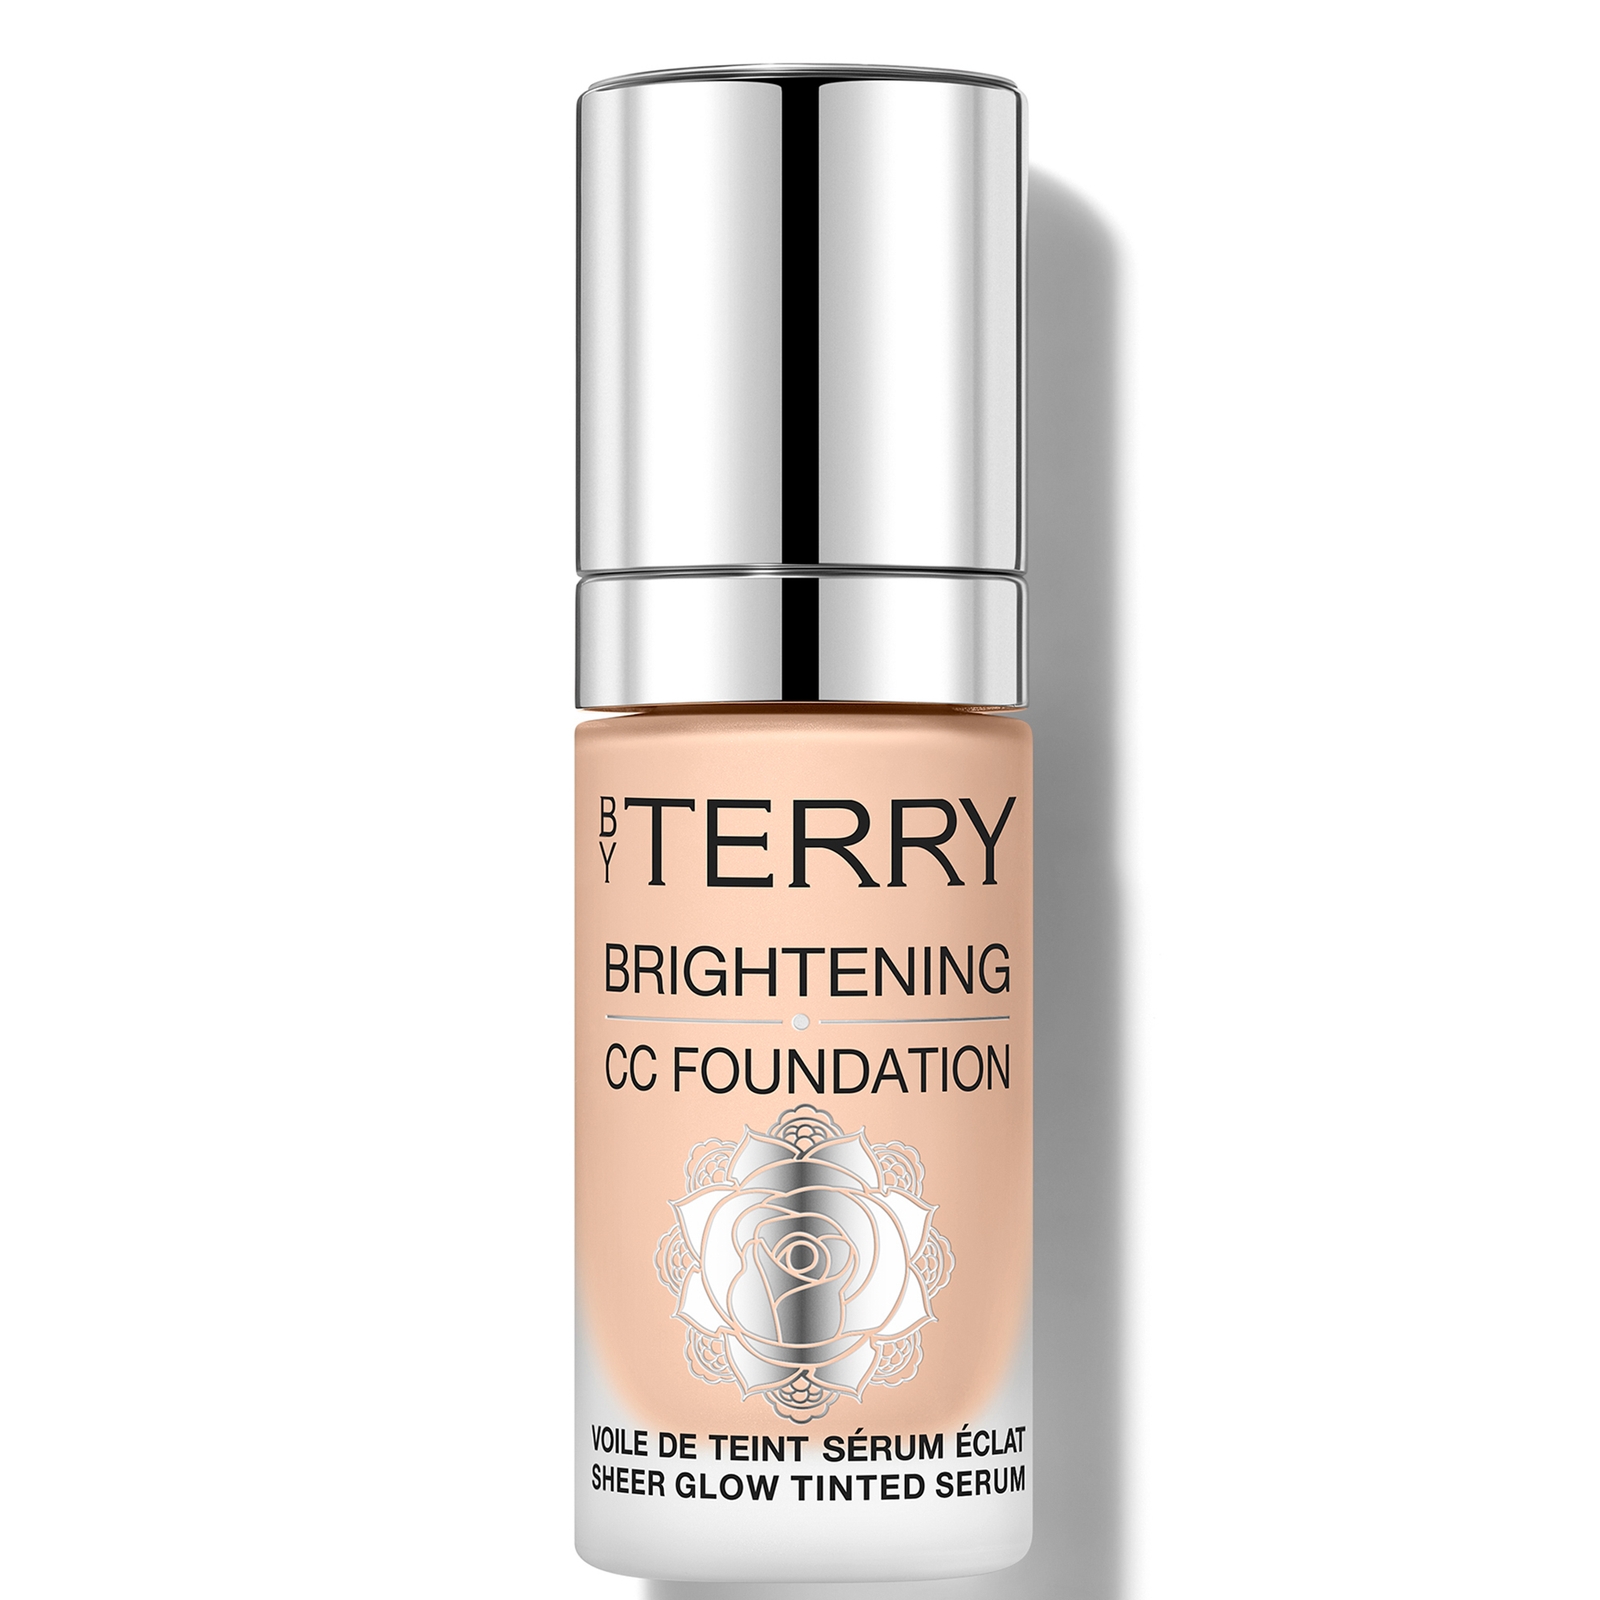 By Terry Brightening Cc Foundation 30ml (various Shades) - 3c In Brown